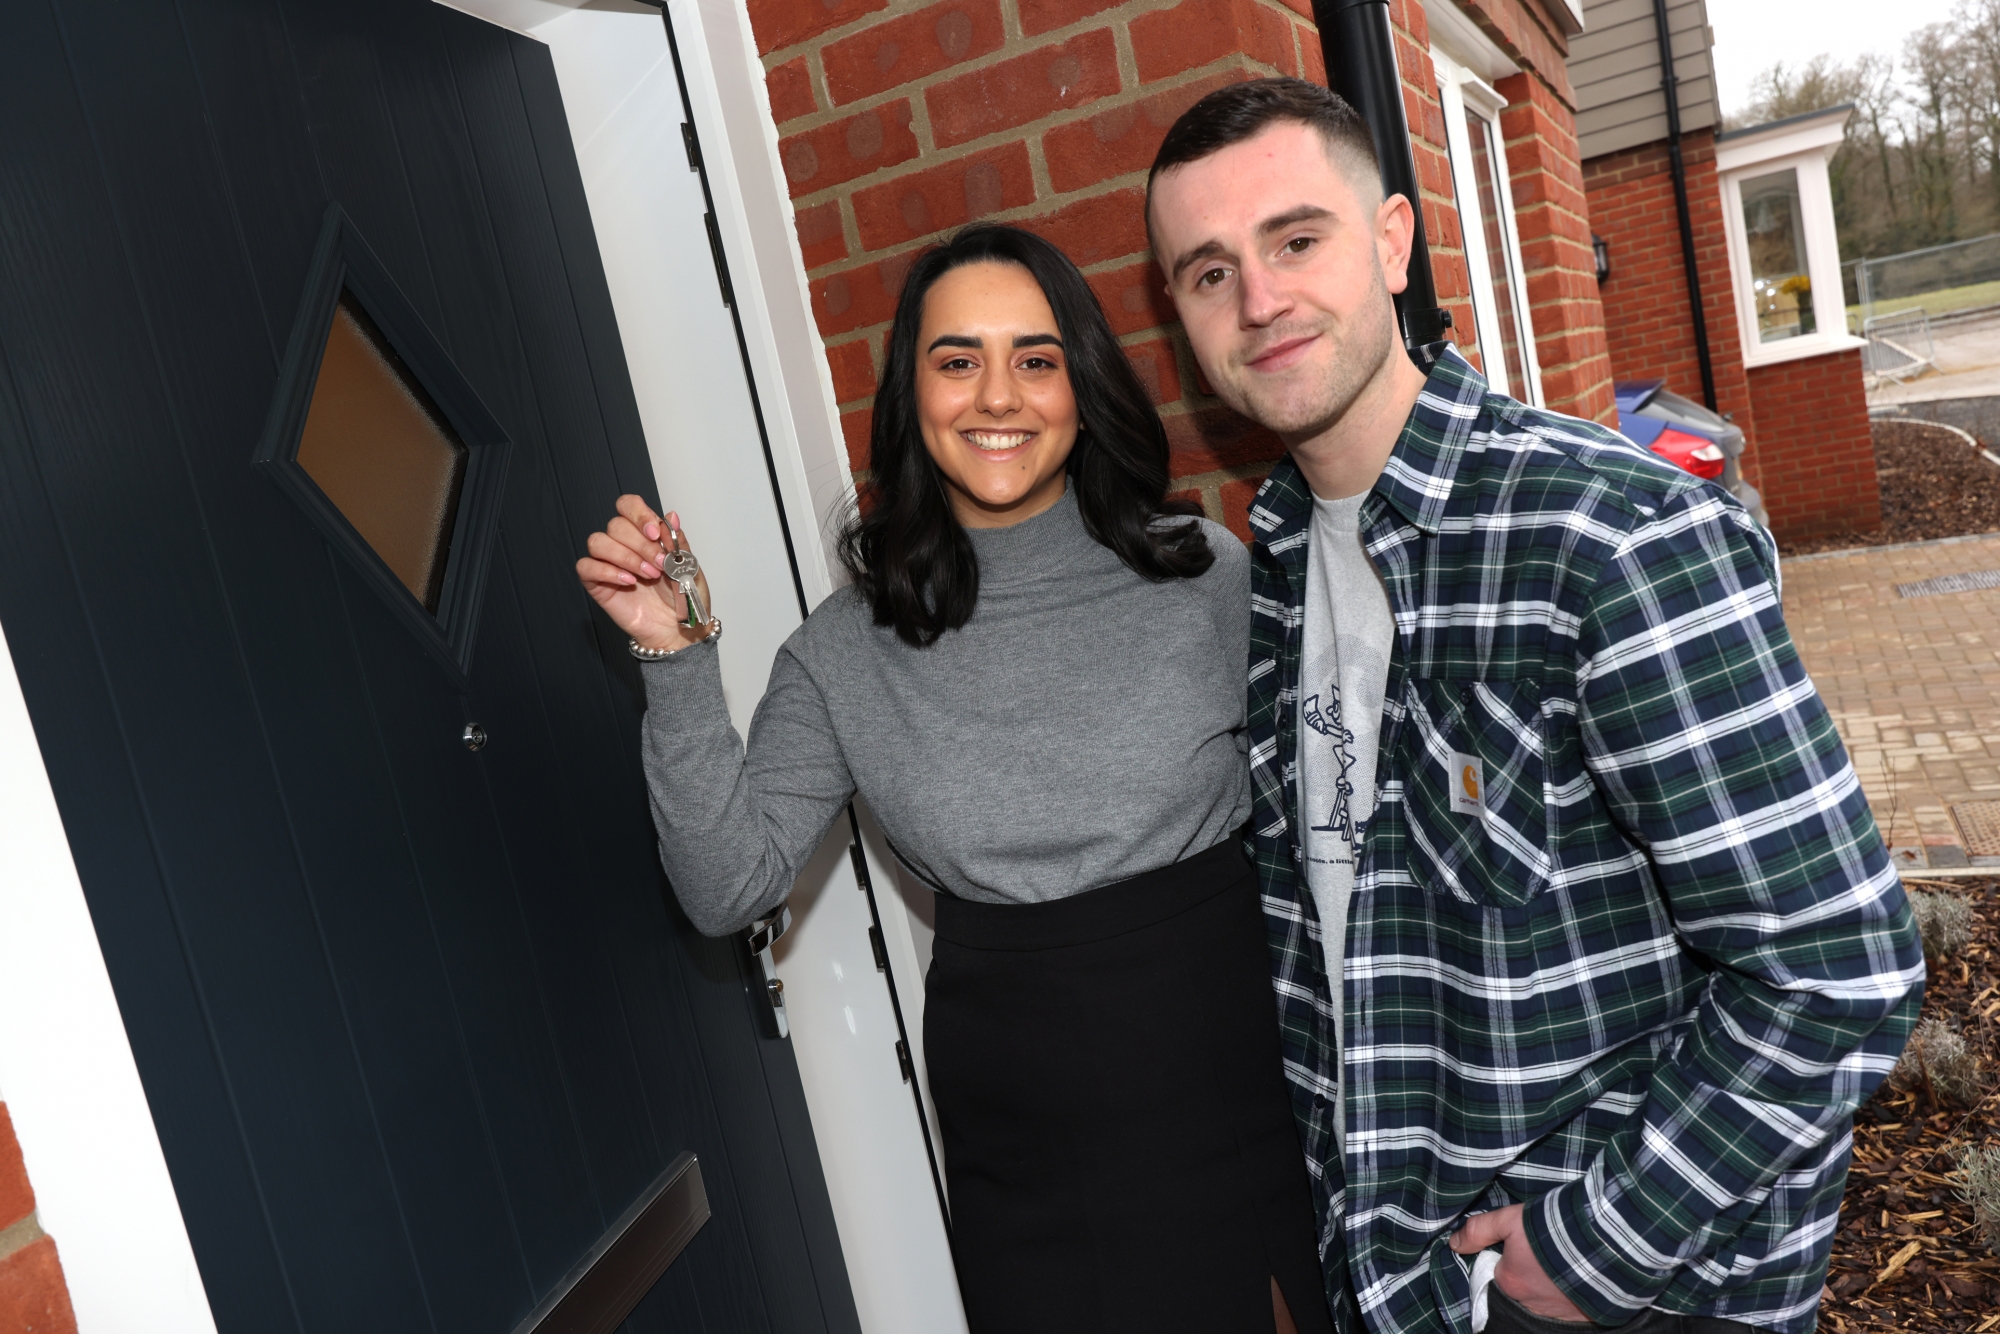 Flying the nest – Yasmin and Luke's first home together